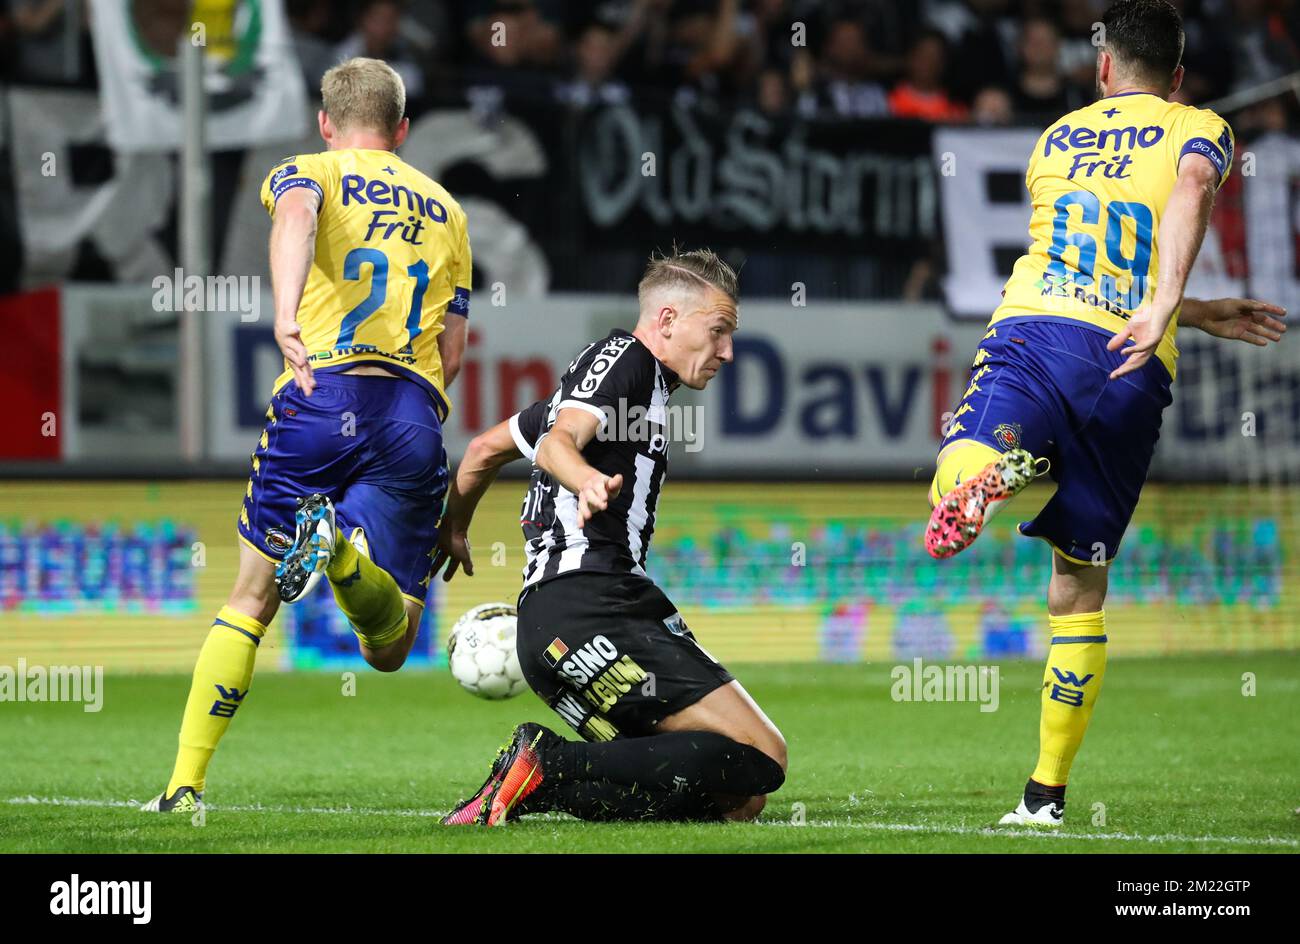 Waasland-Beveren's Laurent Jans and Charleroi's Clement Tainmont fight for the ball during the Jupiler Pro League match between Sporting Charleroi and Waasland-Beveren, in Charleroi, Saturday 30 July 2016, on the first day of the Belgian soccer championship.  Stock Photo